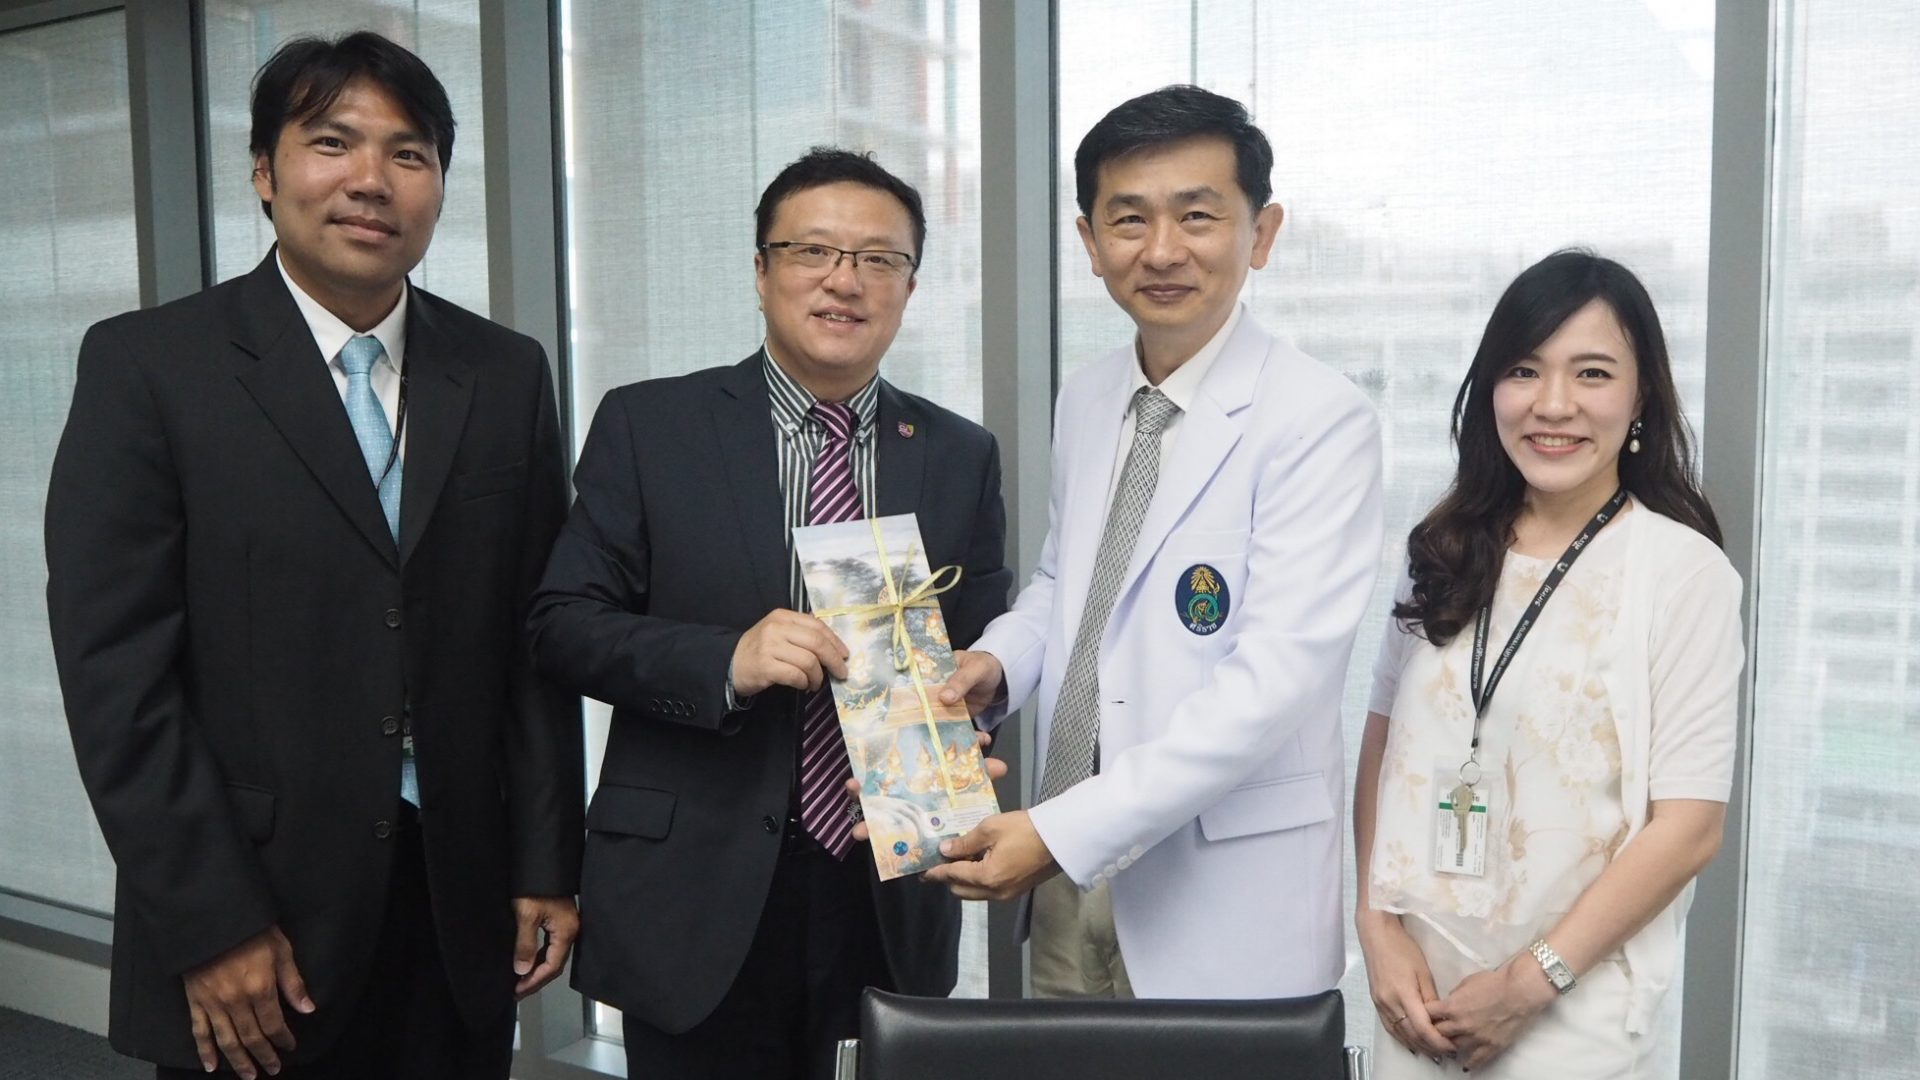 Prof. Gang Li from CUHK Visited Research Department